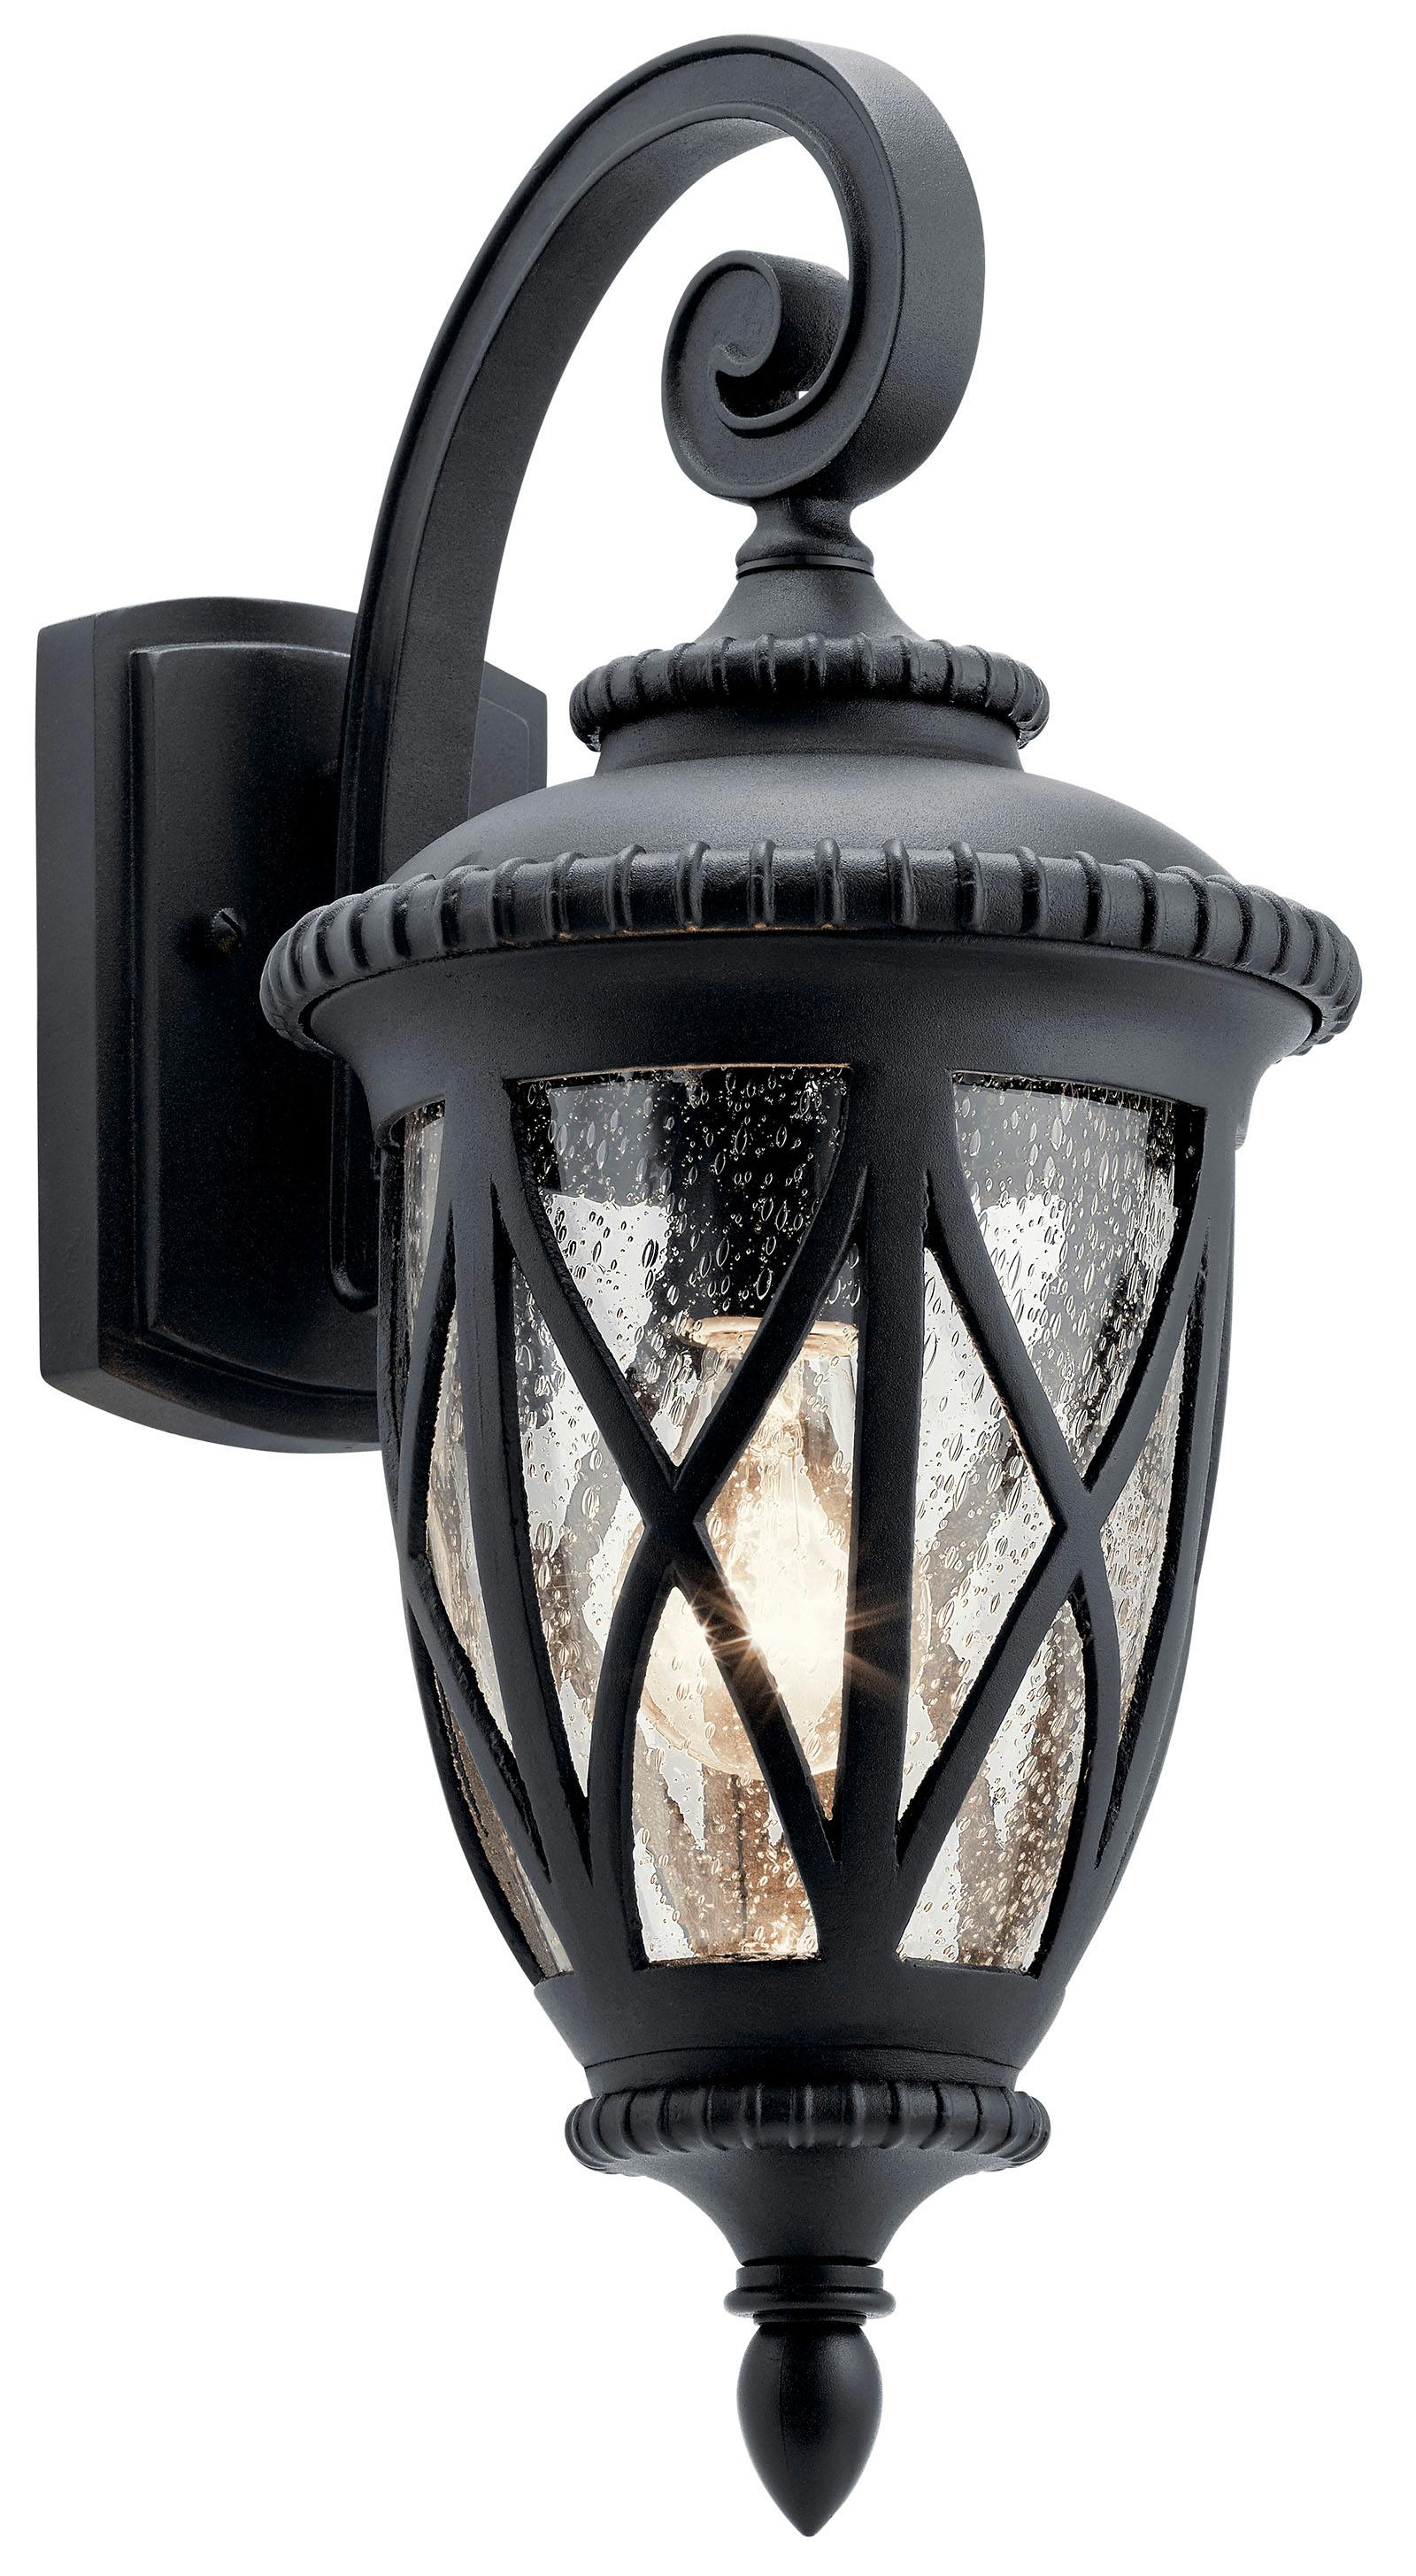 Admirals Cove 18.75" Wall Light Black on a white background